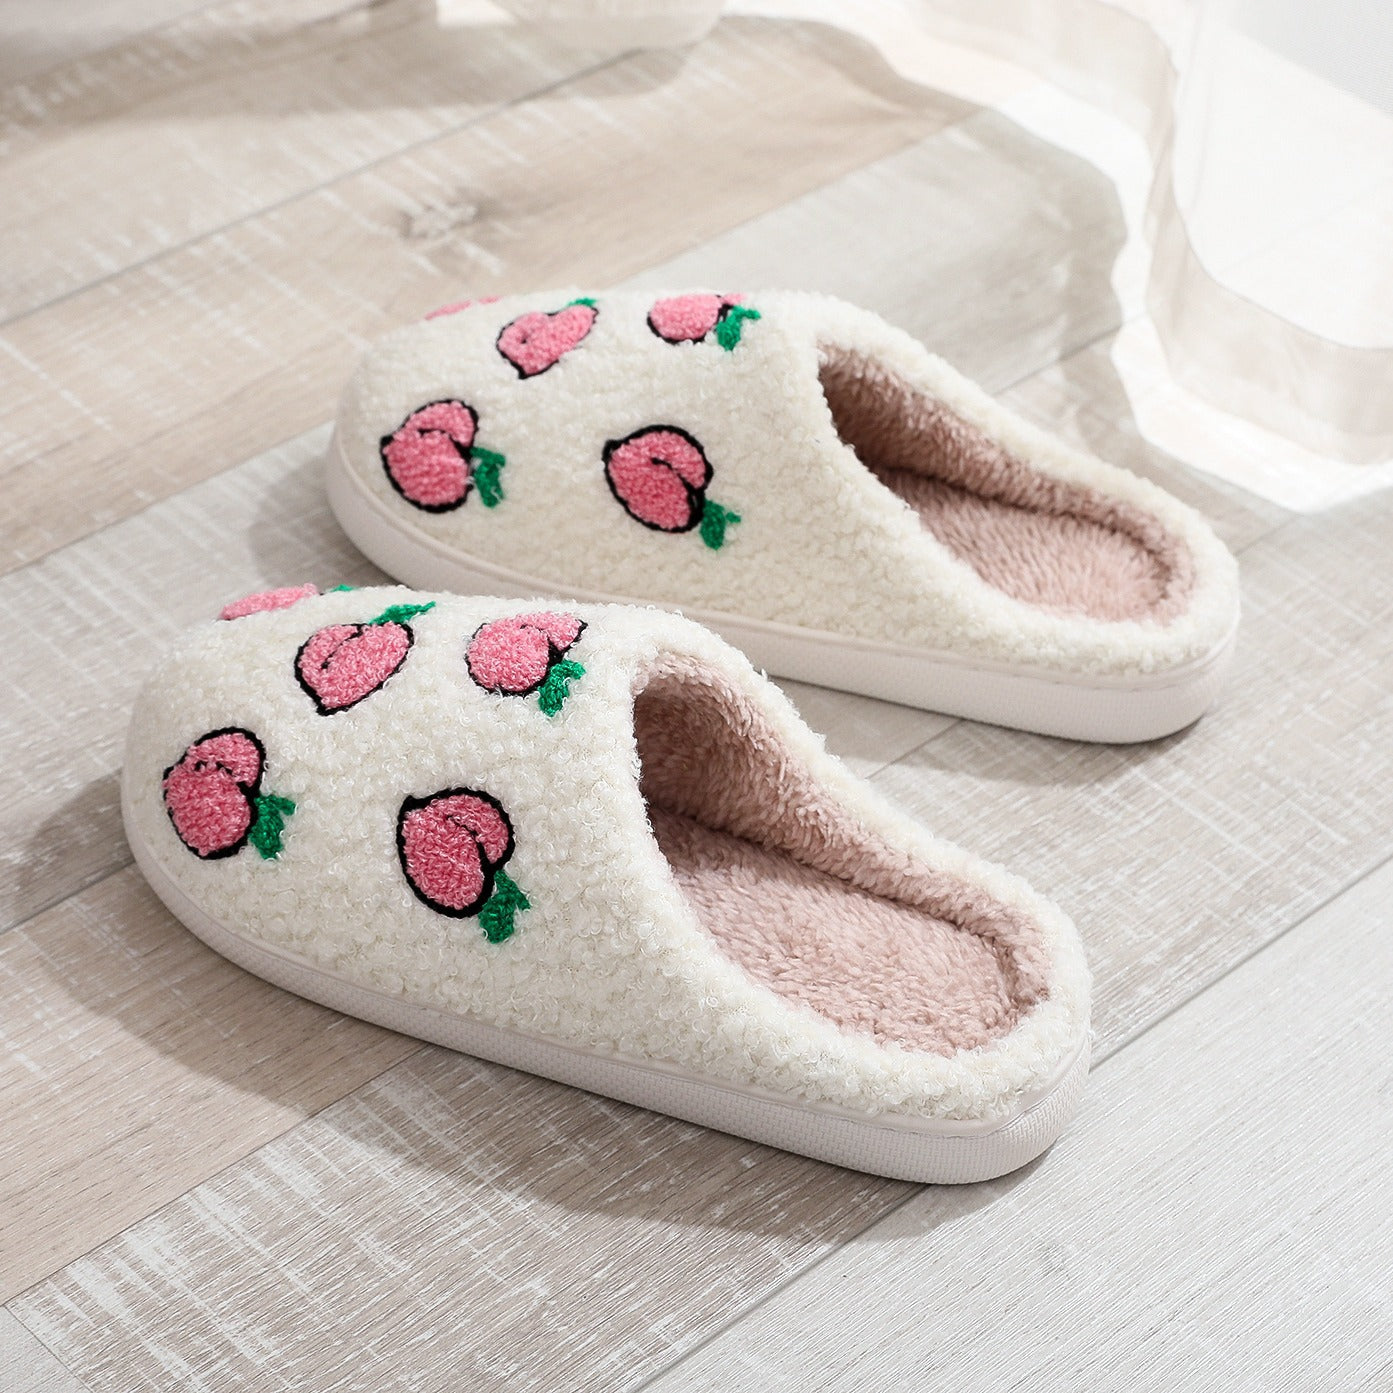 Men & Women Fruits Printed Plush Comfy Fuzzy Slippers